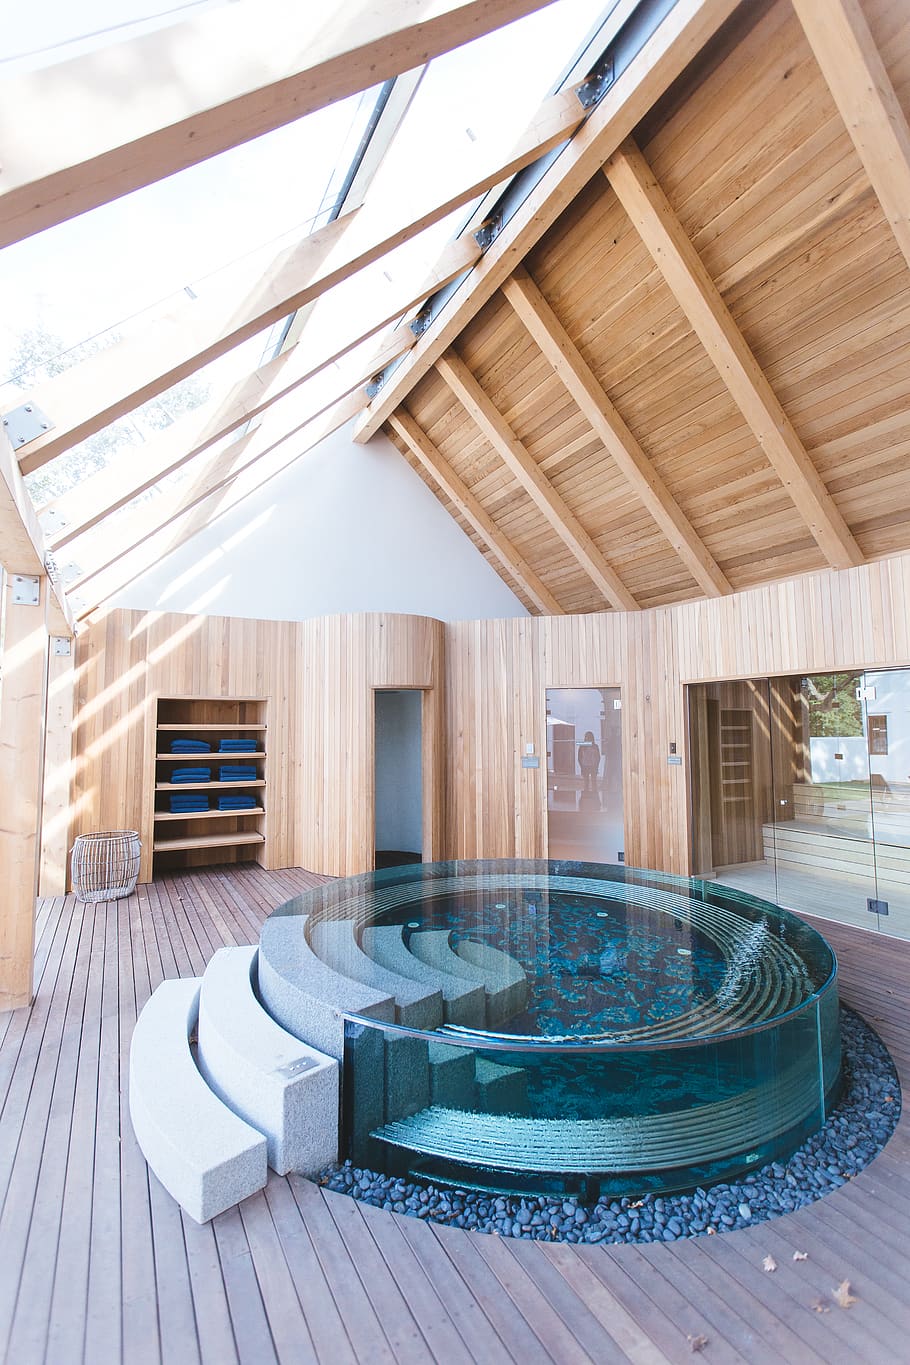 A beautiful indoor spa tub fit for six people., architecture